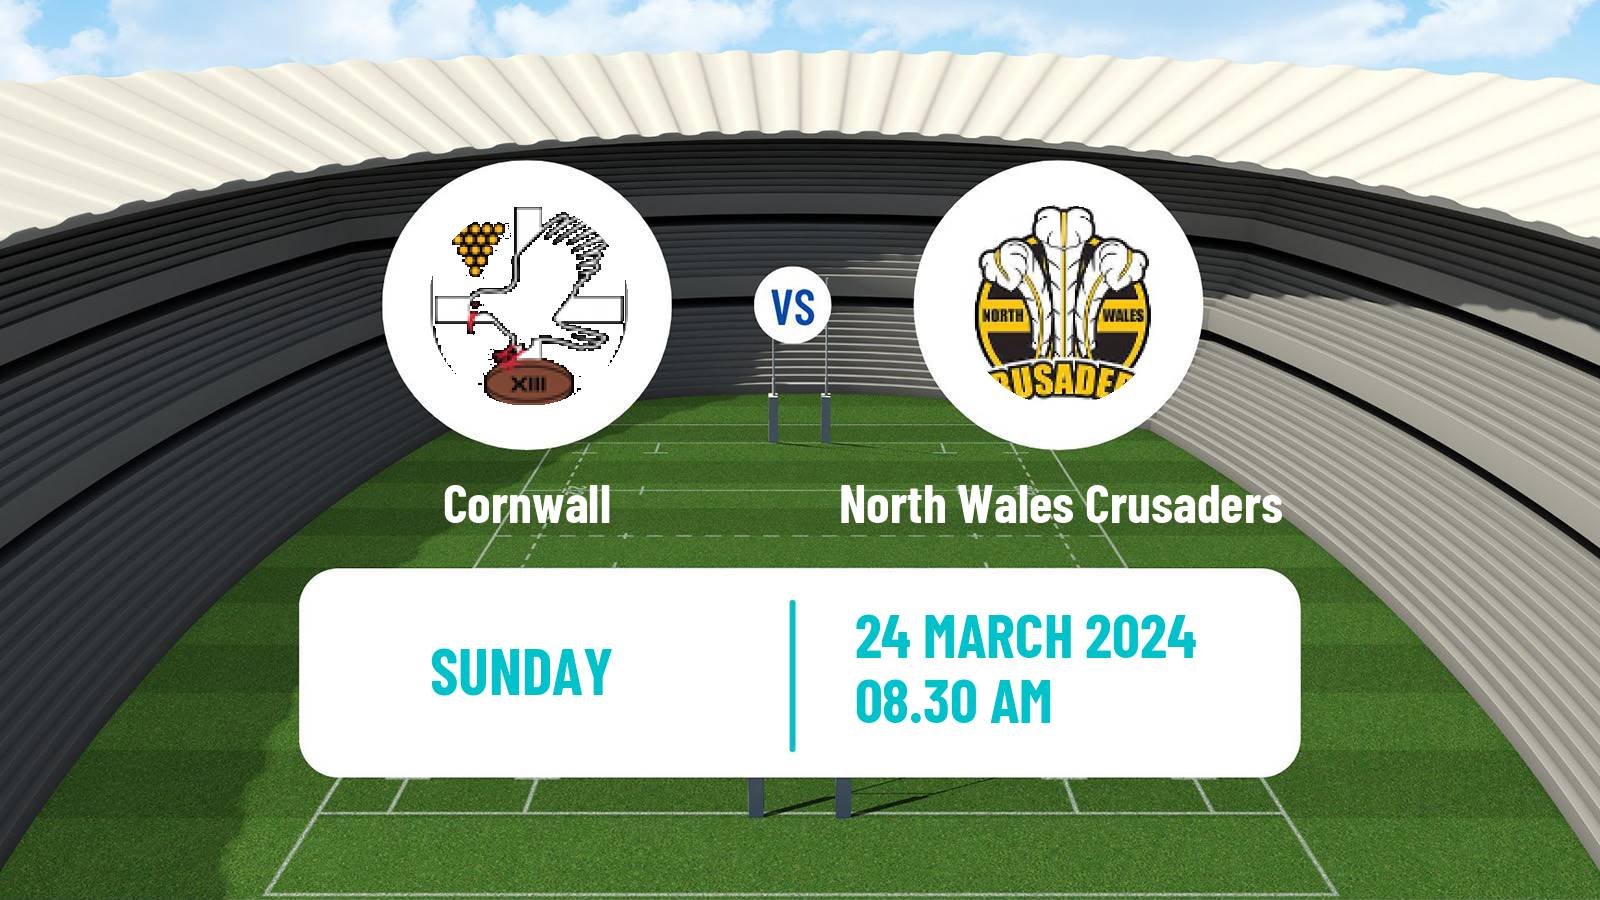 Rugby league English League 1 Rugby League Cornwall - North Wales Crusaders